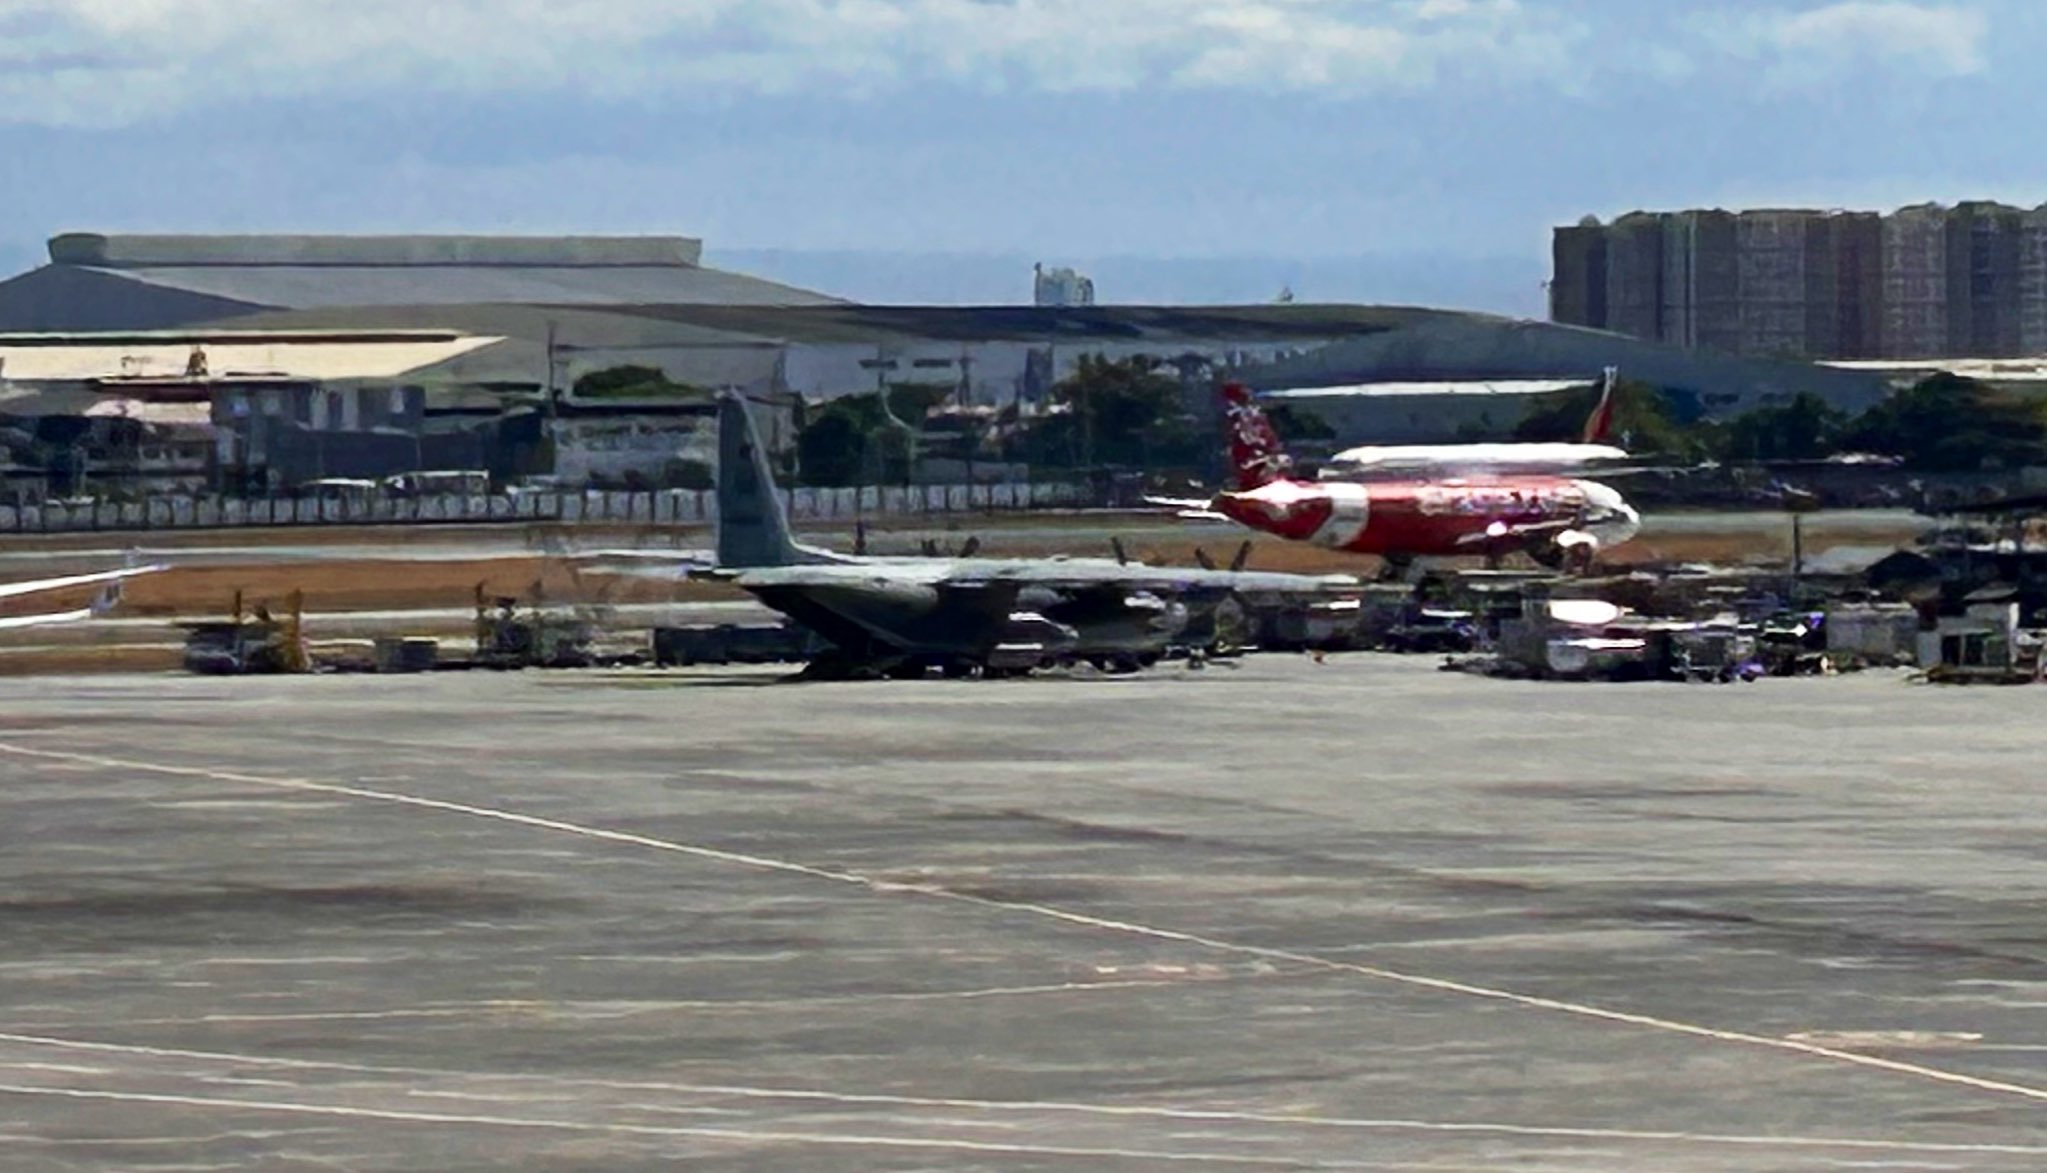 some naia flights delayed due to stalled c-130 aircraft